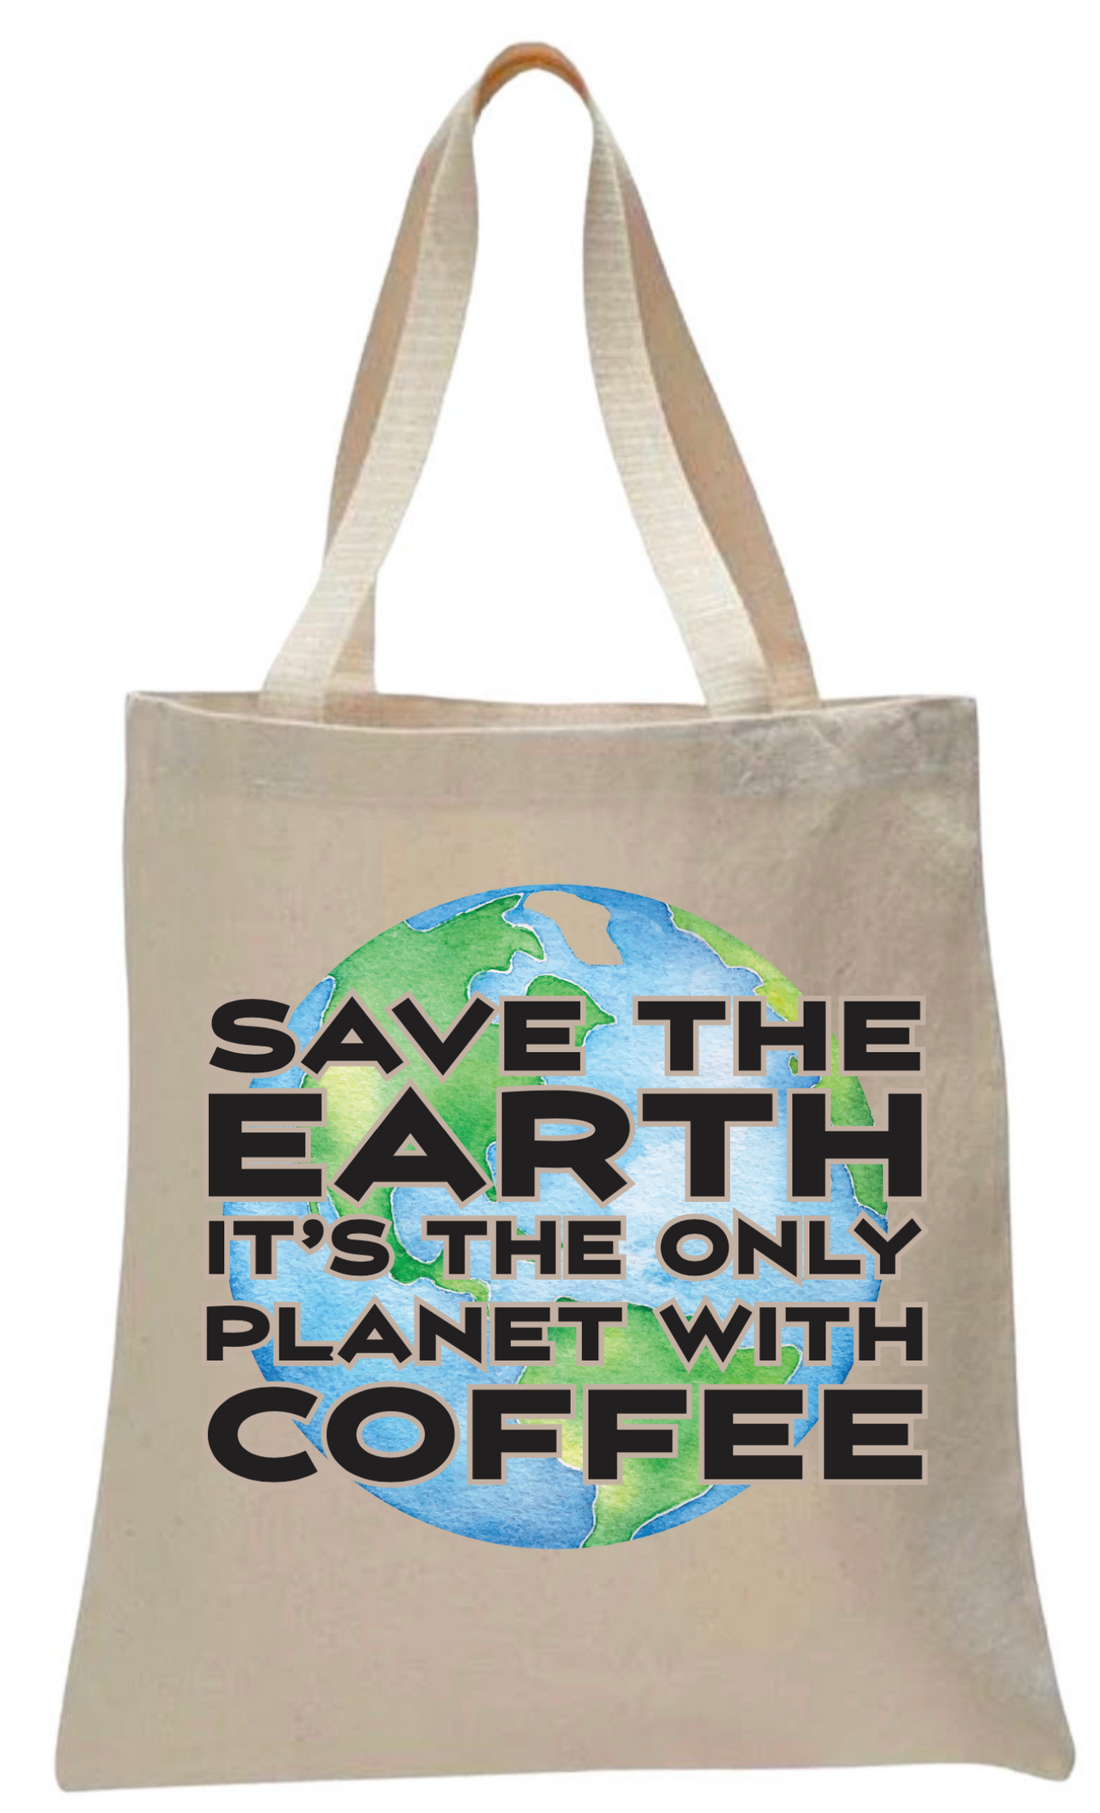 SAVE THE EARTH CANVAS TOTE BAG